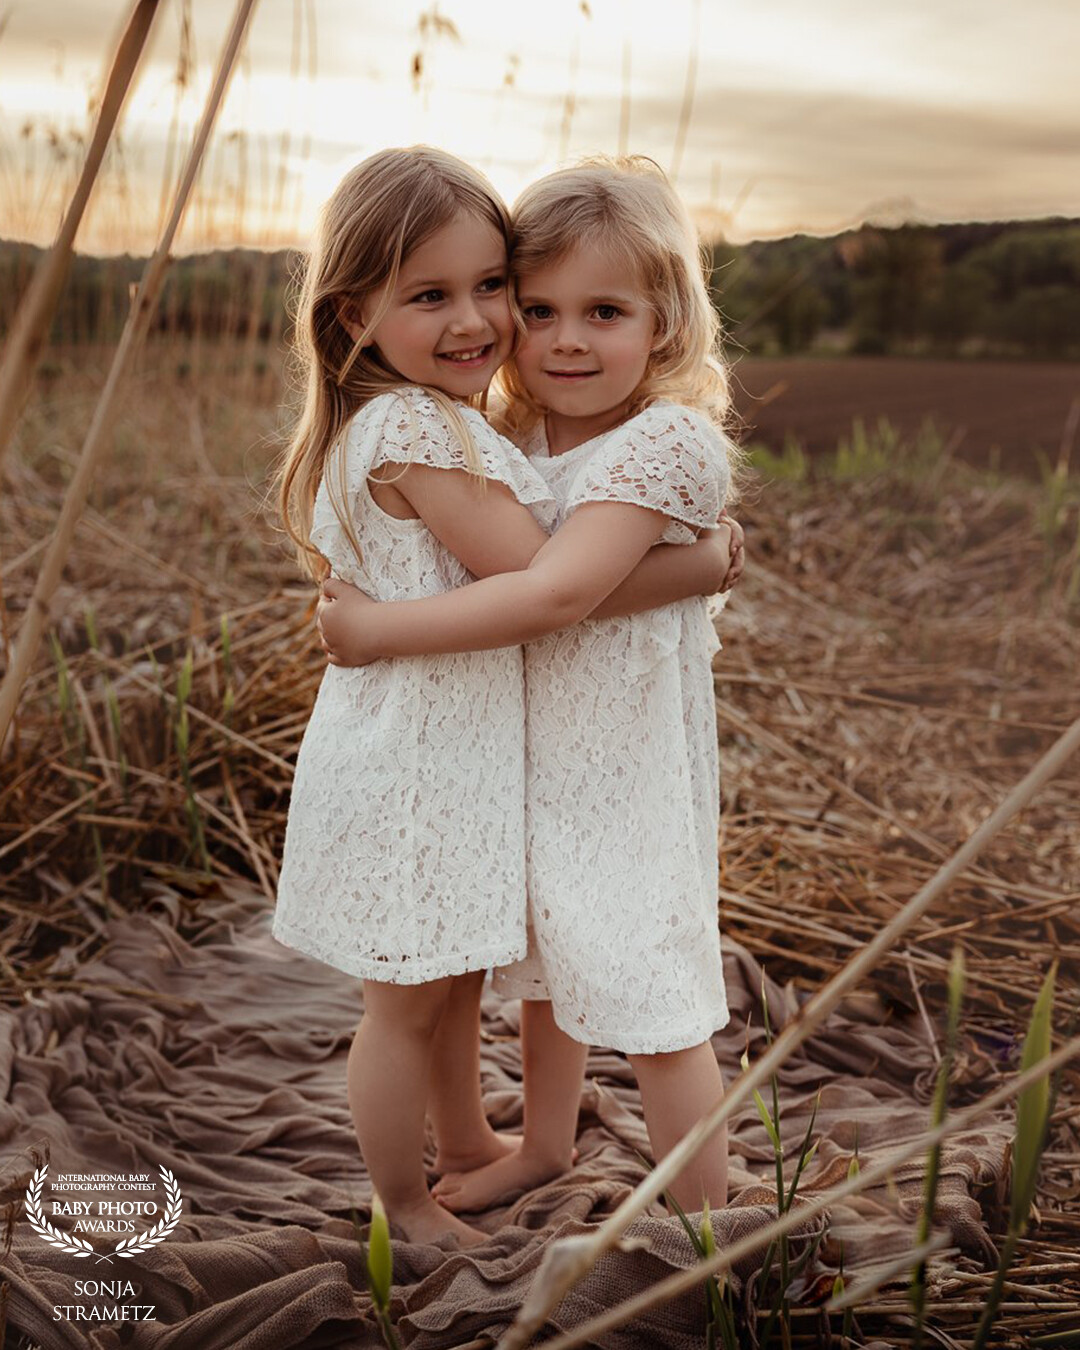 Childhood memories. <br />
<br />
If two photo addicted mom's meet for a photoshoot and the girls wan't to do the same. Absolutely amazing how gorgeous they are.